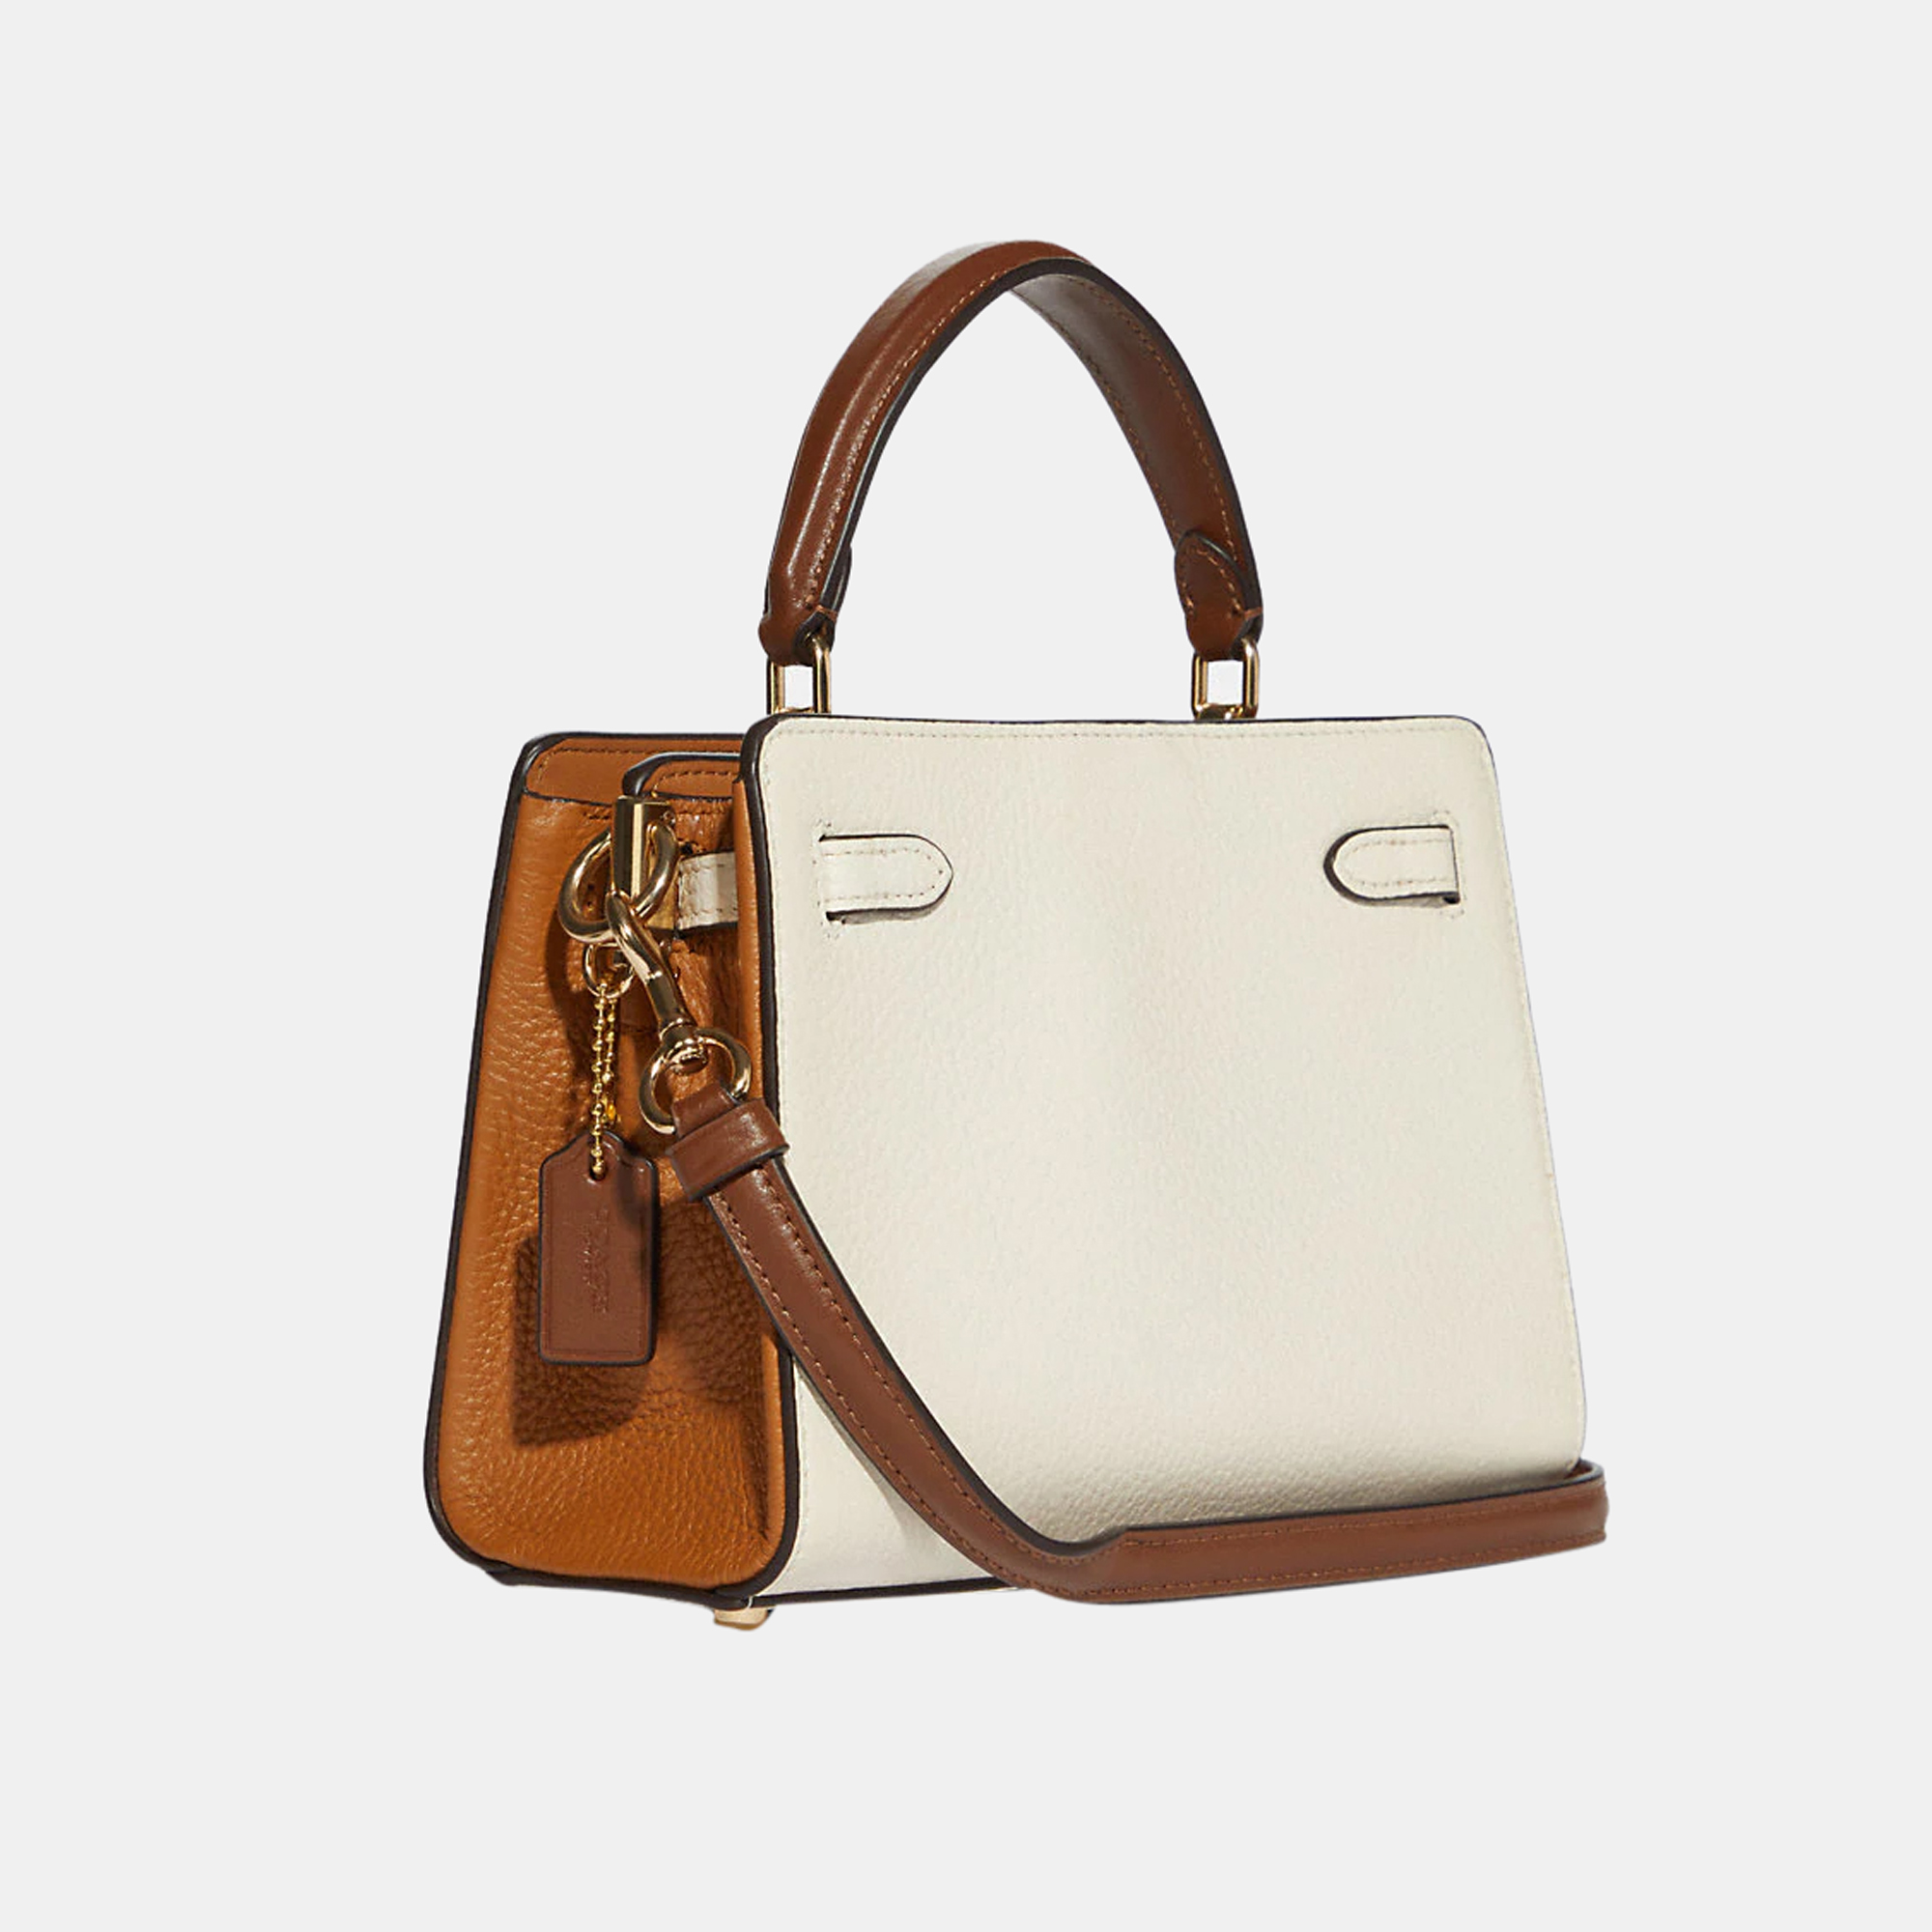 Coach White Leather Top Handle Bag